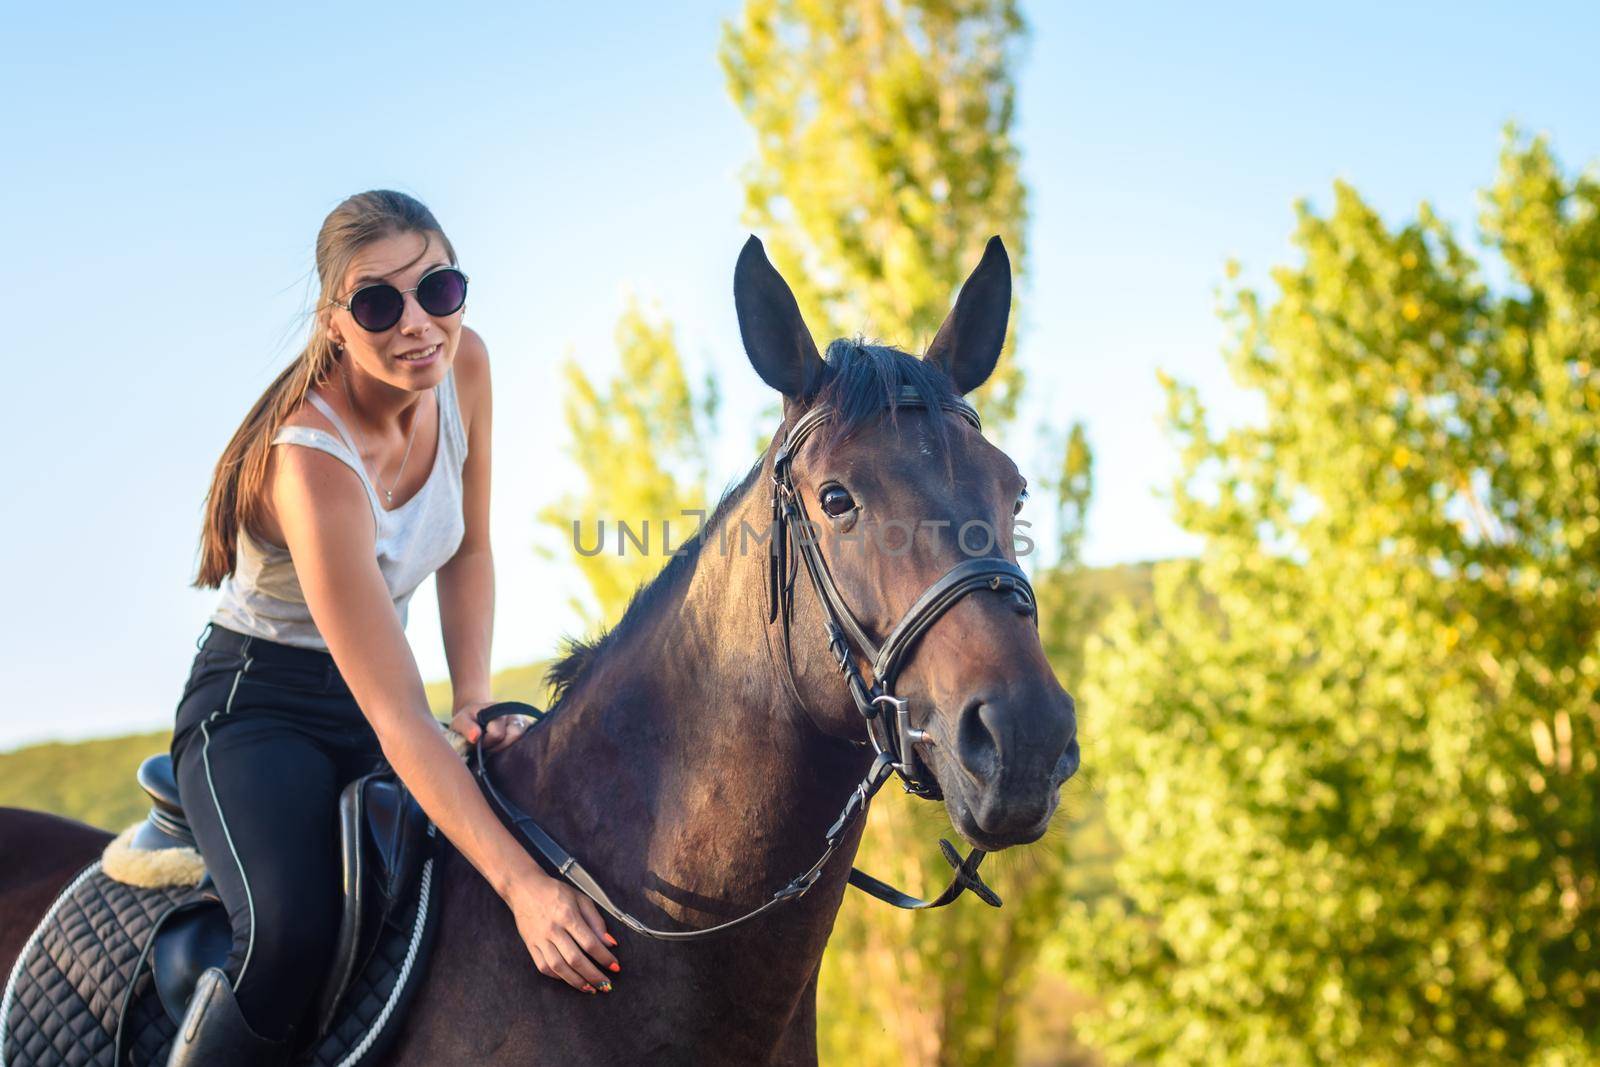 Girl with glasses strokes a horse on a horse ride by Madhourse